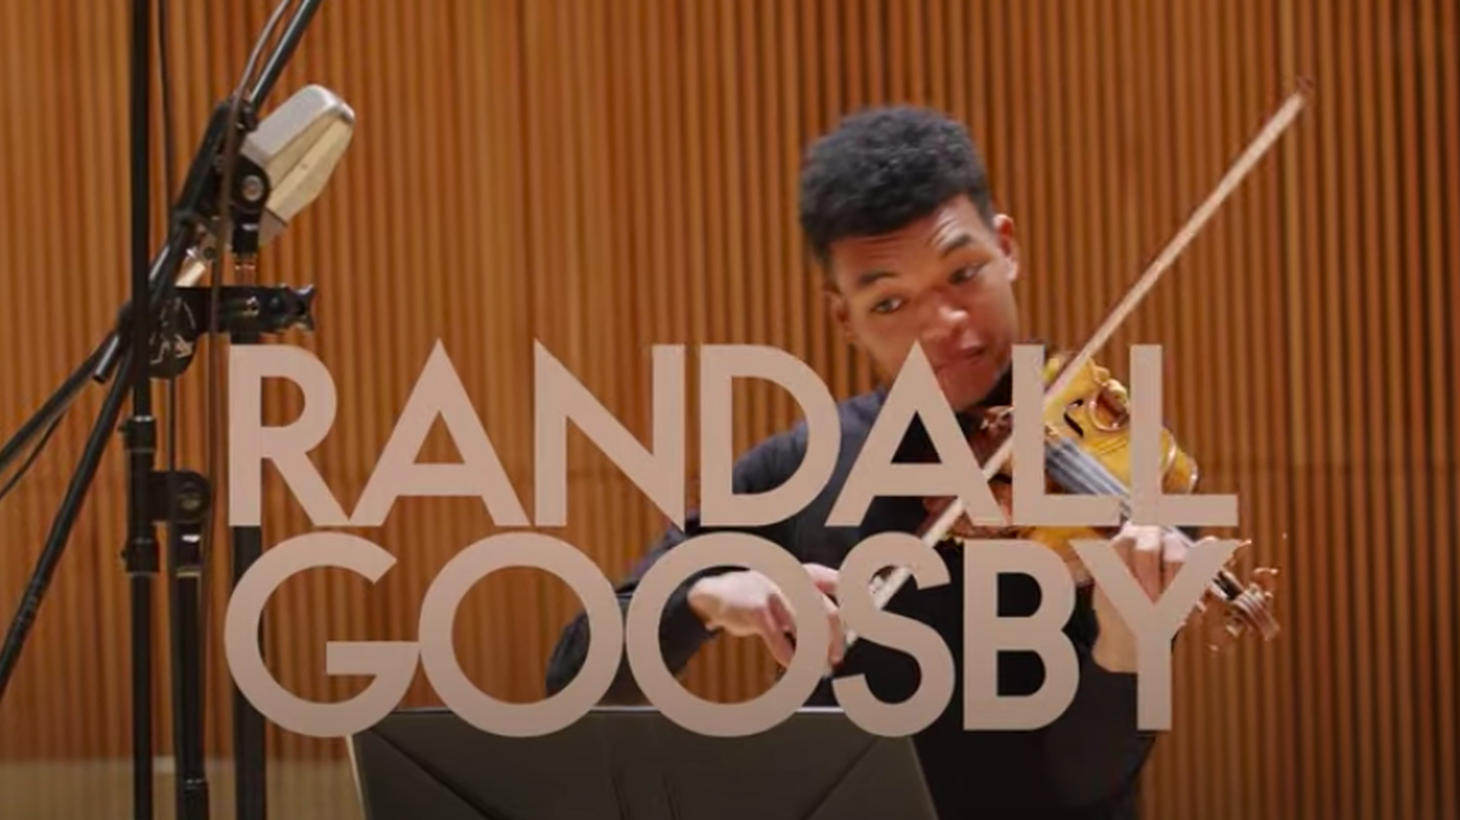 Randall Goosby says his album “Roots” is about showing Black composers’ contributions to classical music.